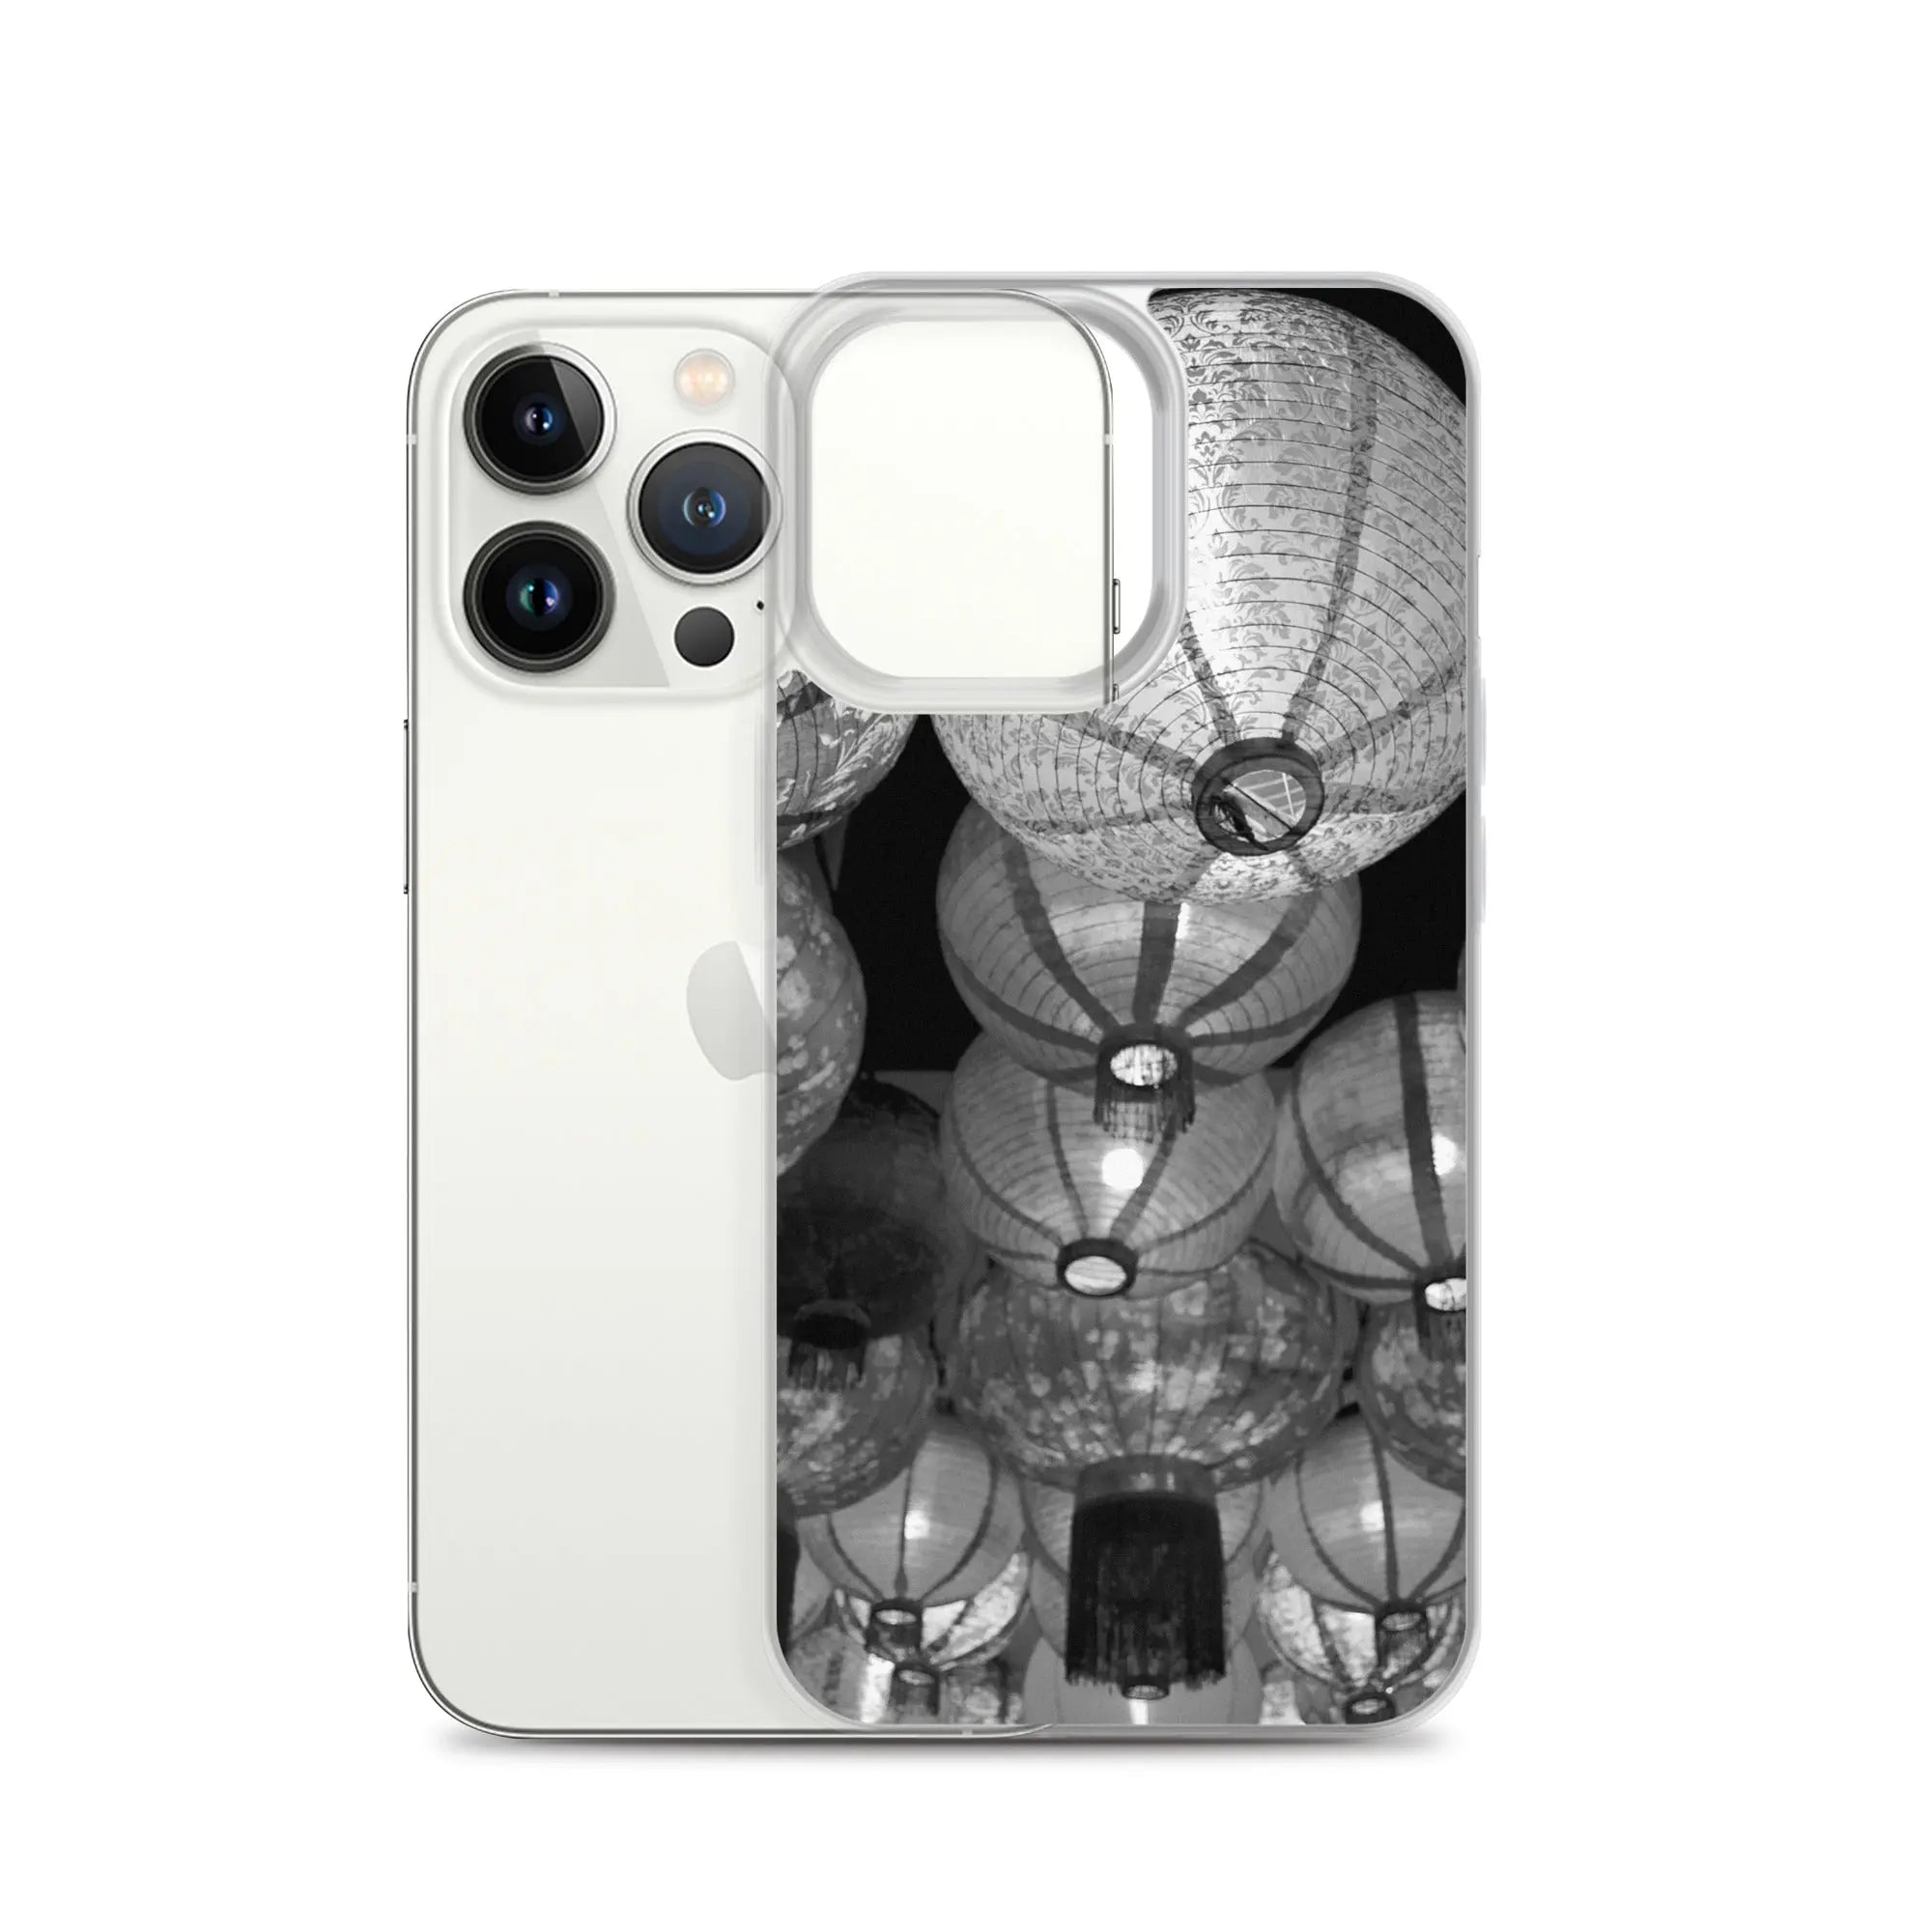 Raise The Red Lanterns - Designer Travels Art Iphone Case - Black And White - Iphone 13 Pro - Mobile Phone Cases